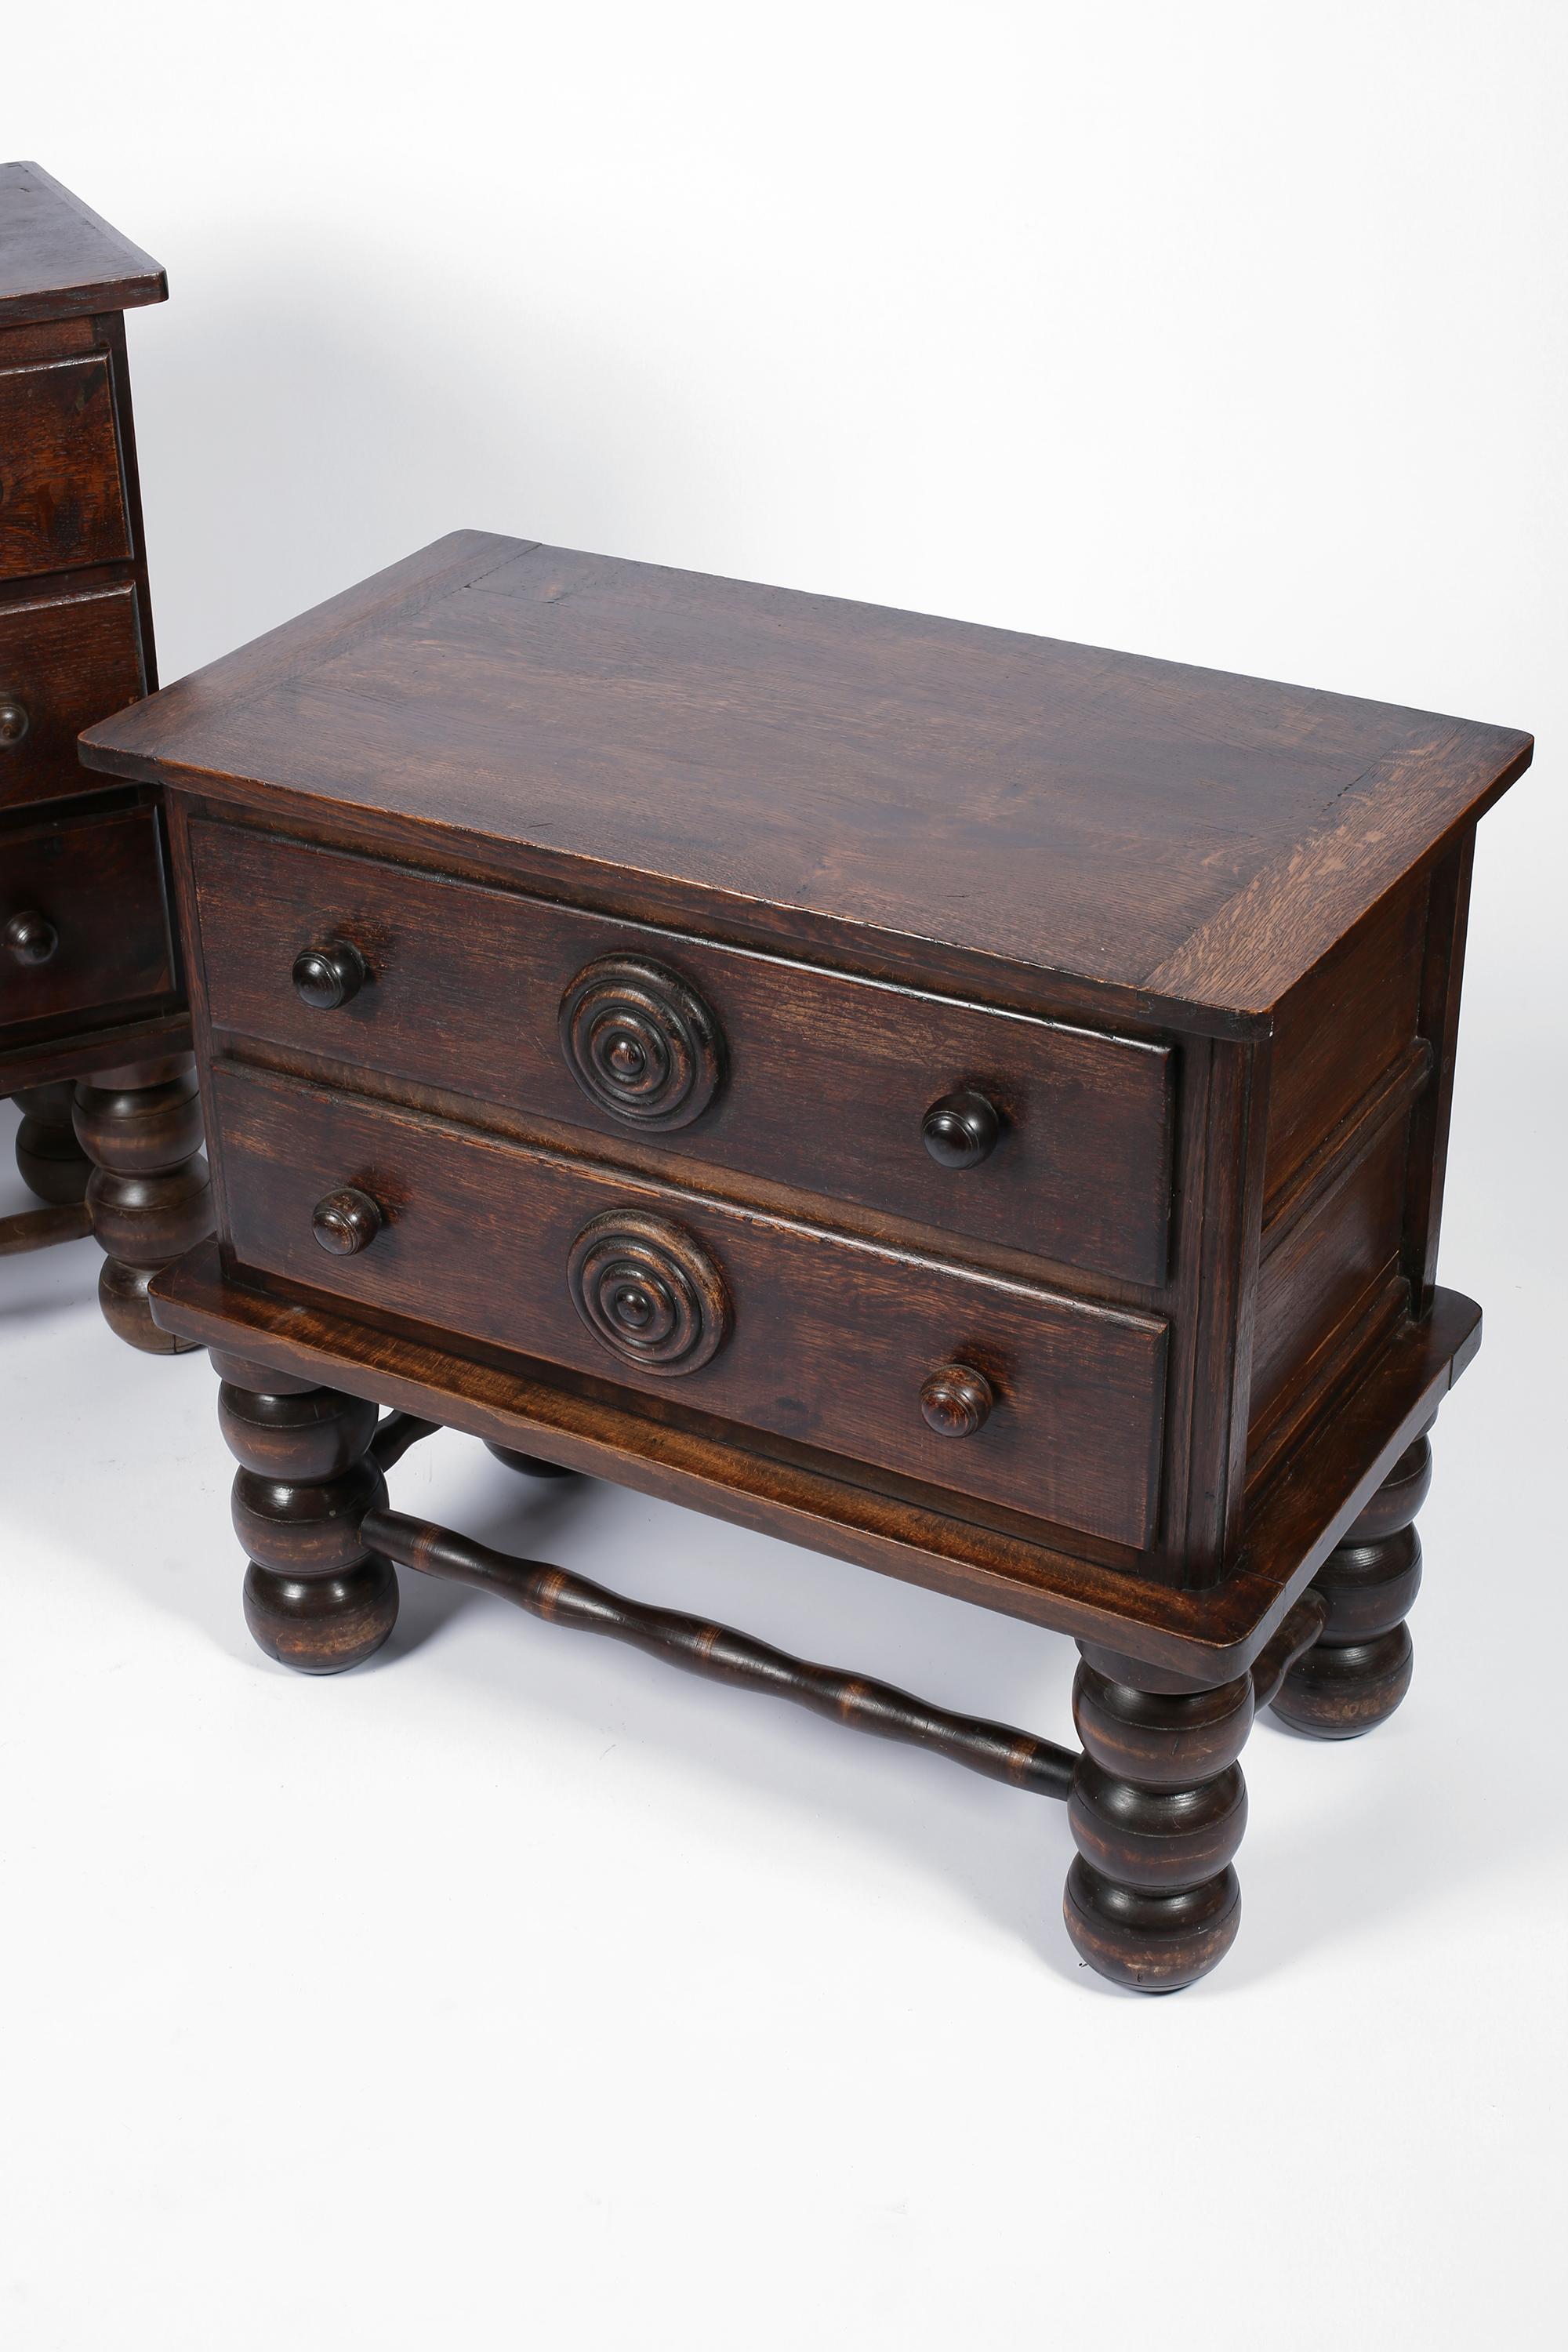 A two drawer chest of drawers by modernist designer Charles Dudouyt (1885-1946). Constructed from dark stained solid oak, featuring substantial bobbin turned legs and bulls eye detailing to the drawers. French, circa 1940.